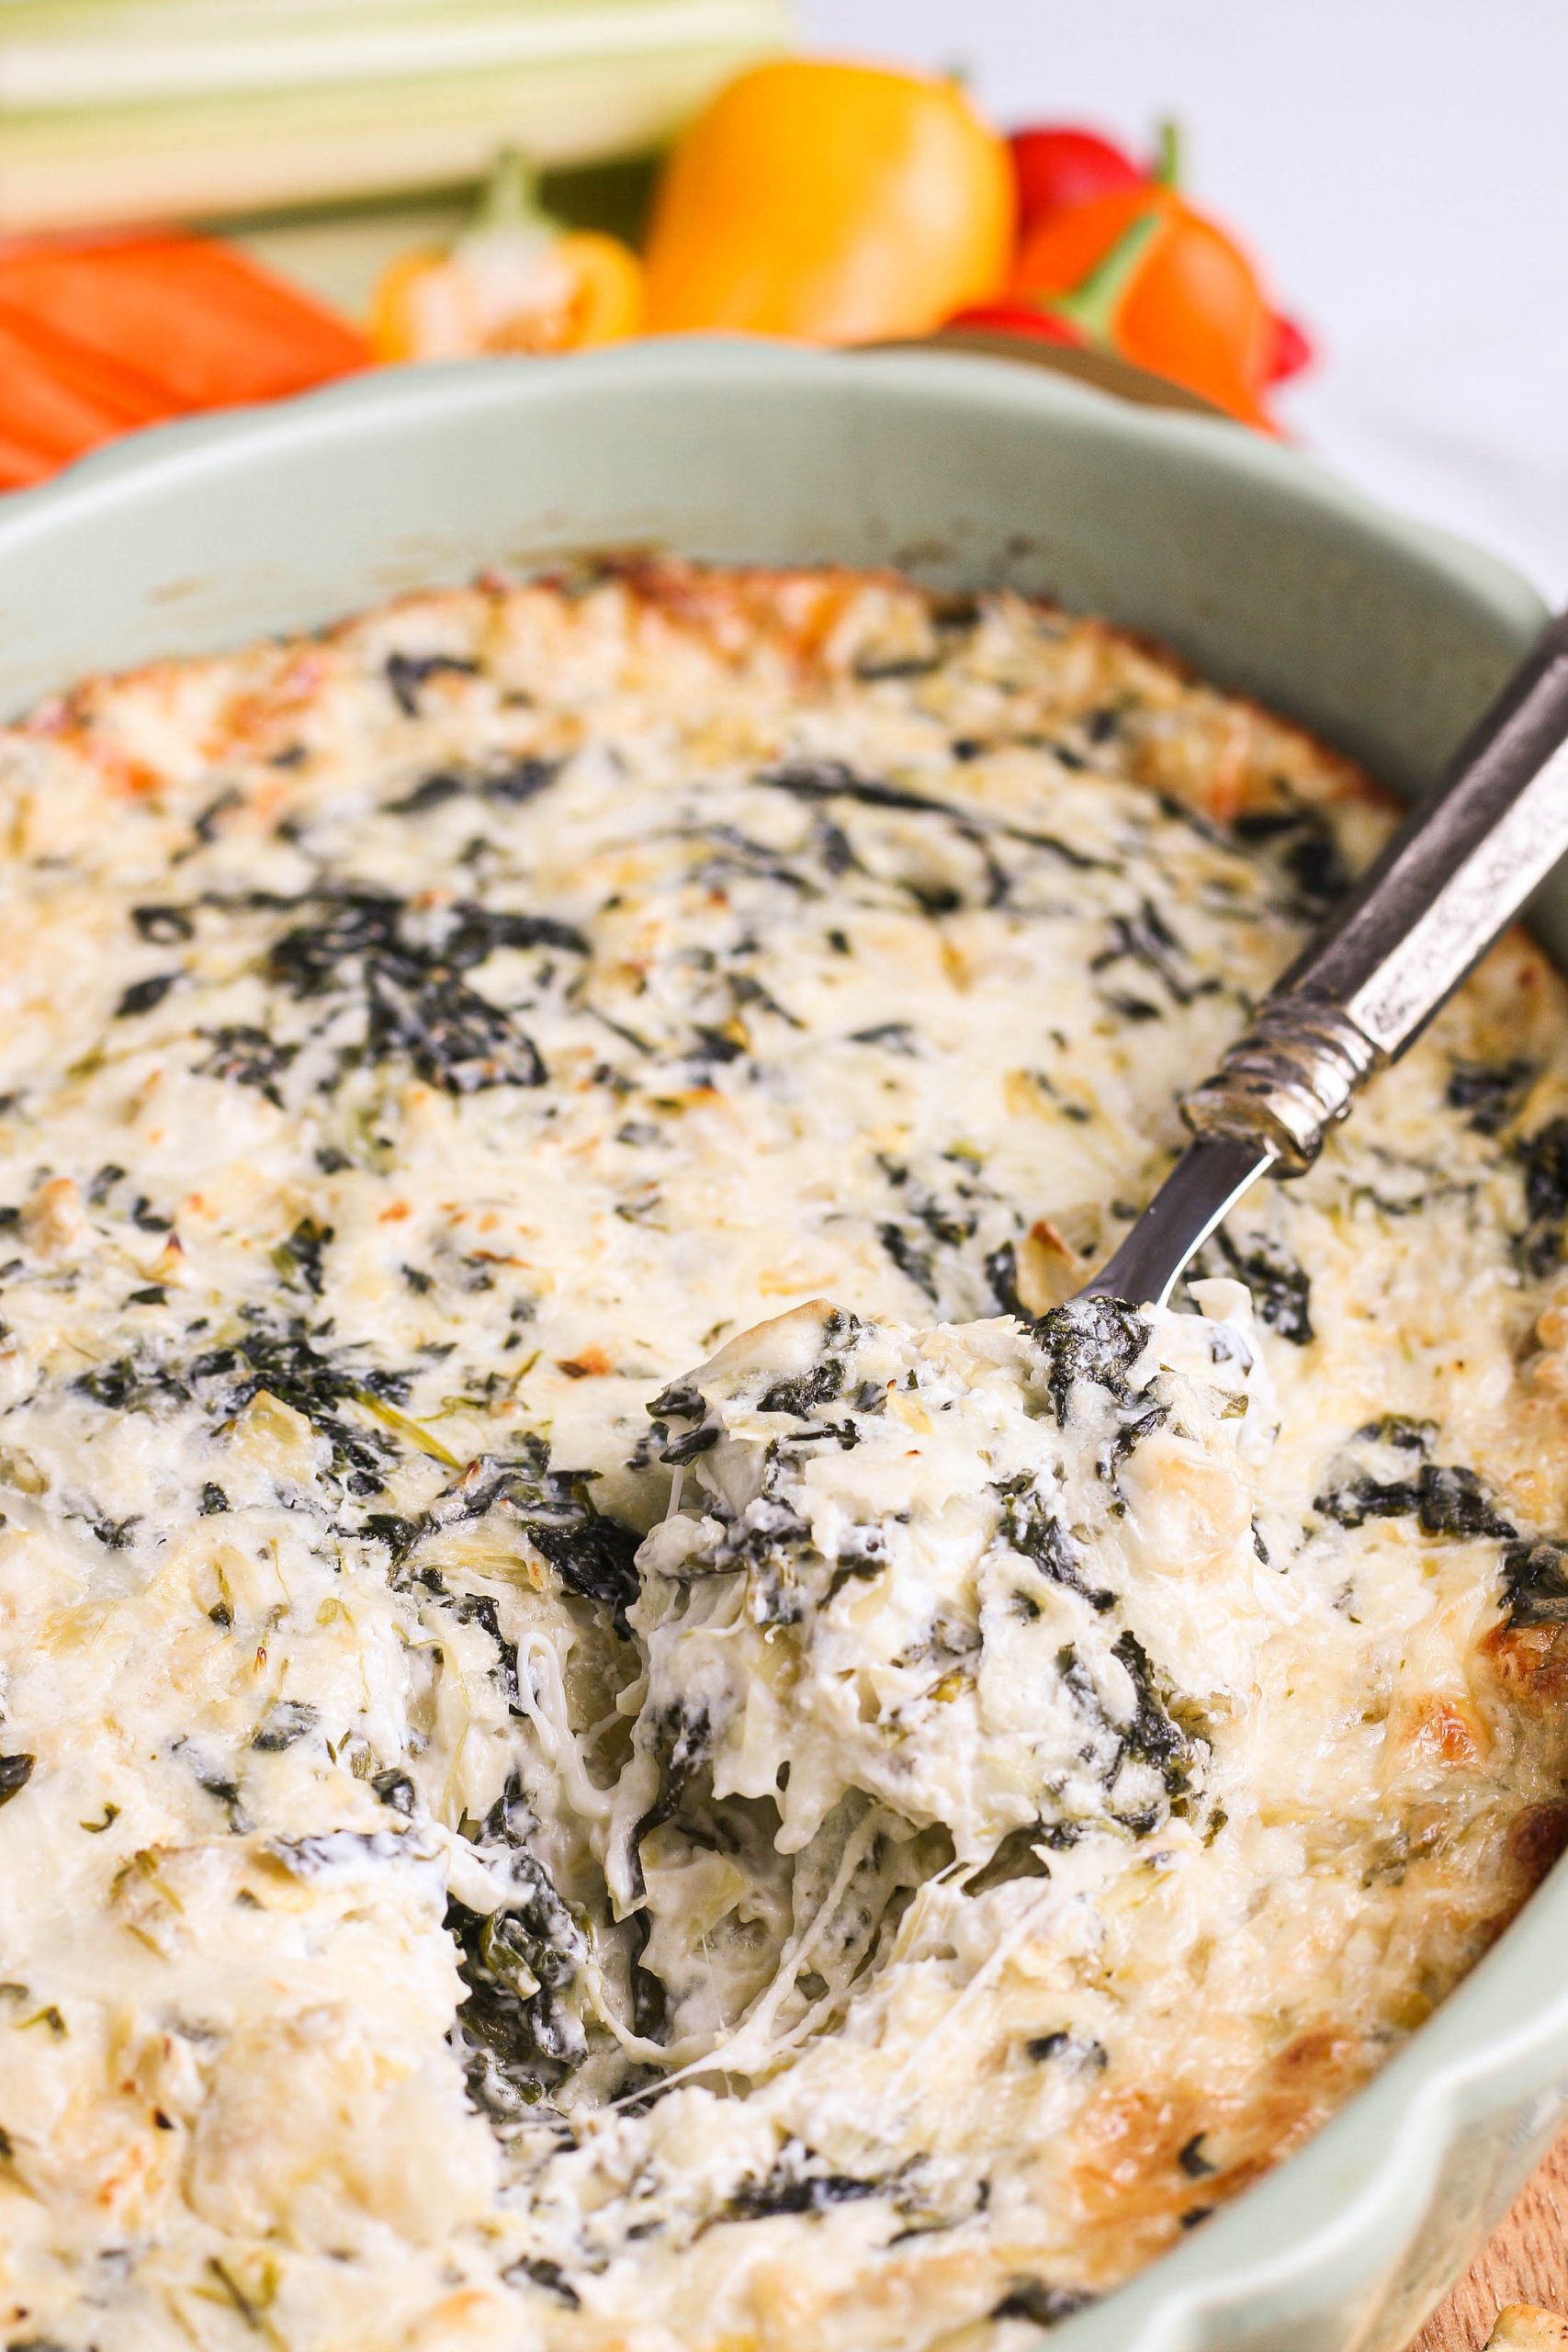 Spinach artichoke dip with spoon.